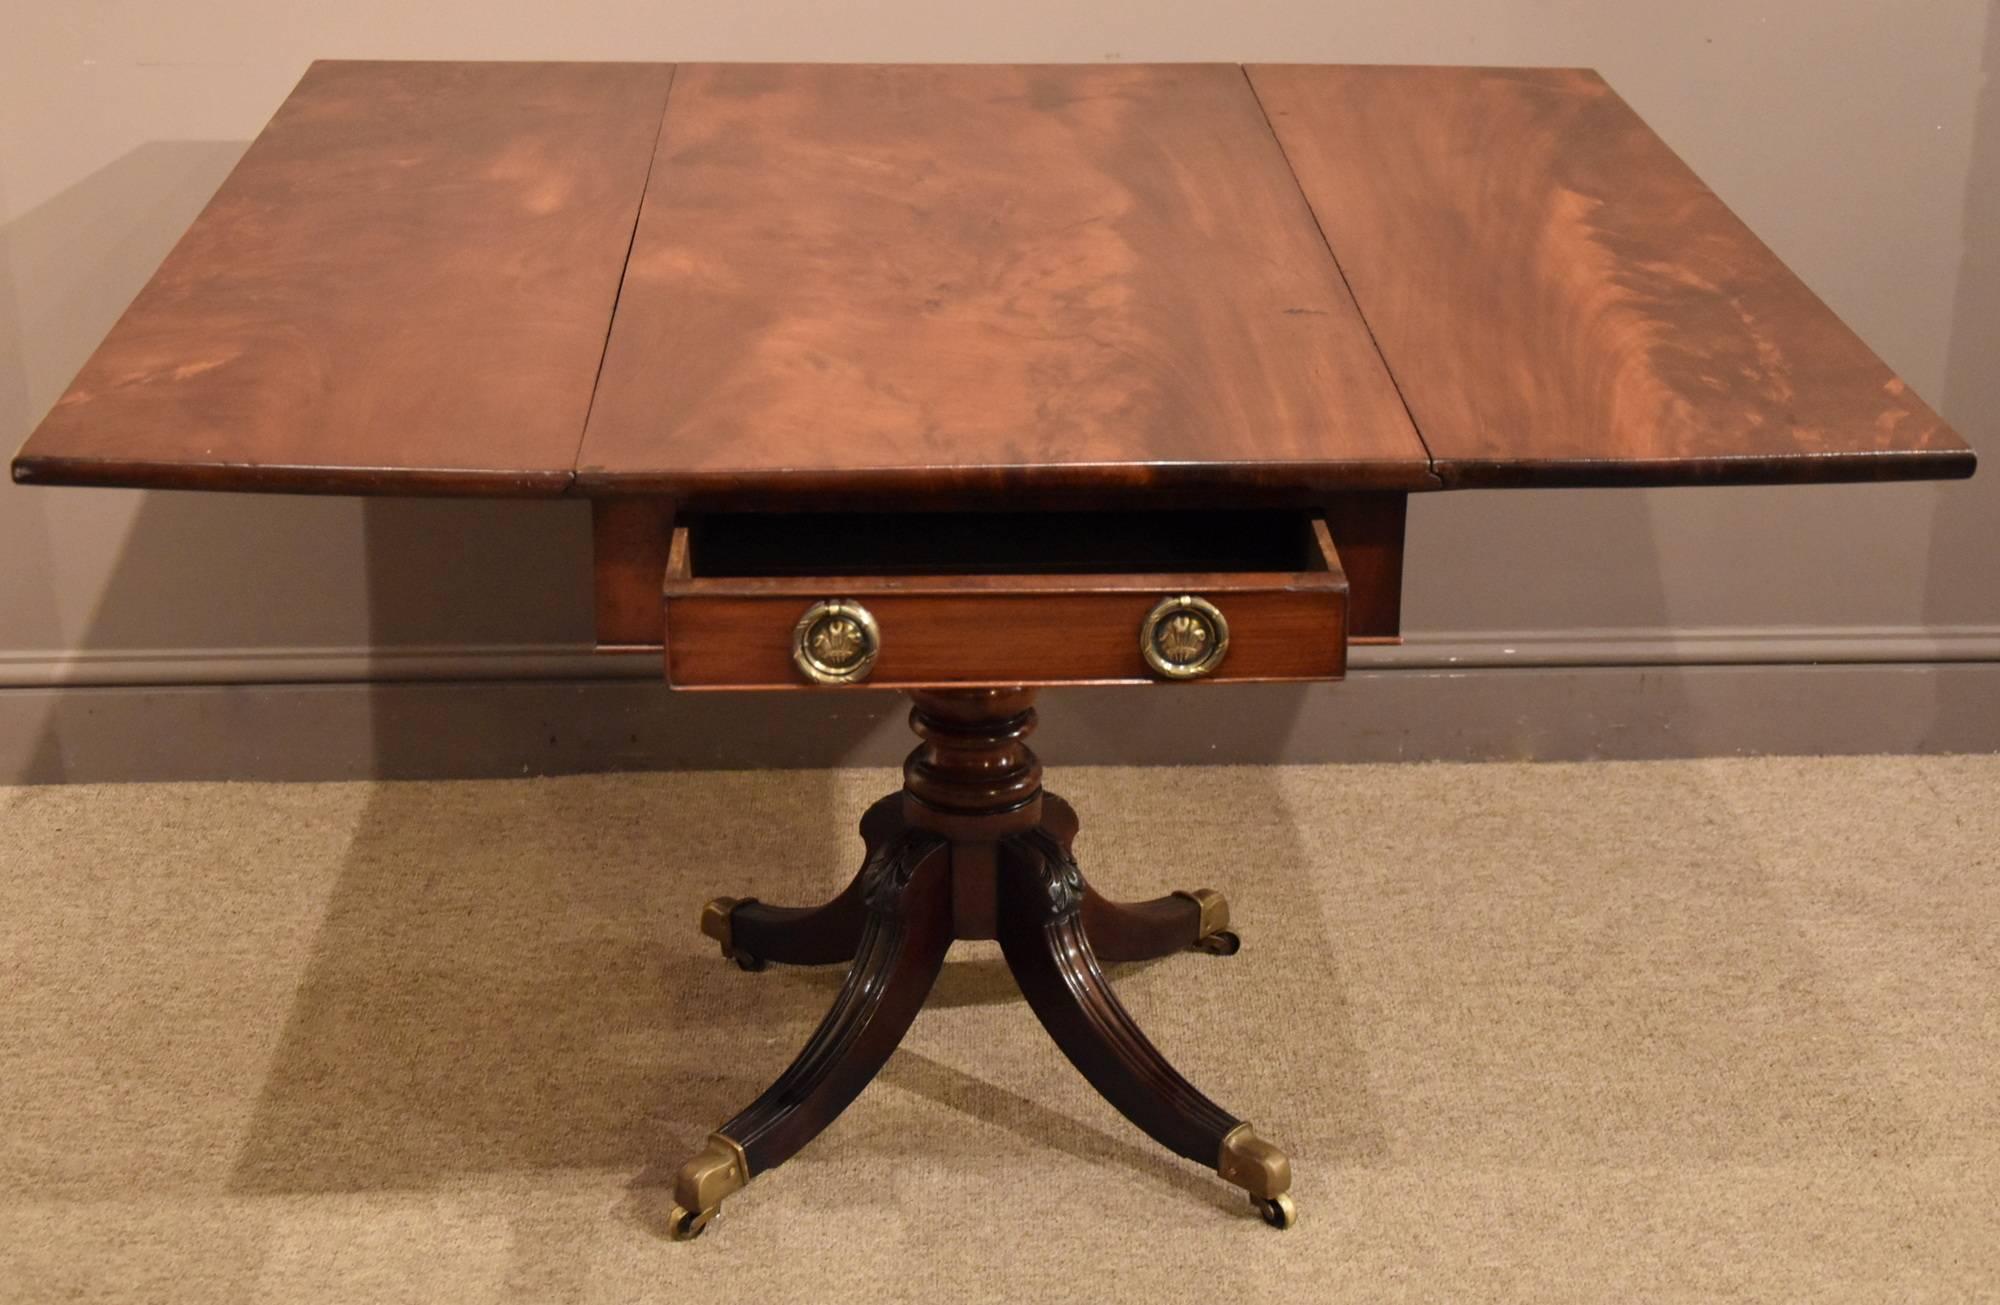 An elegant Regency period mahogany pembroke table with flamed timber. The piece with two drawers on turned balaster base played legs terminating in brass casters.

All of the items that we advertise for sale have been as accurately described as